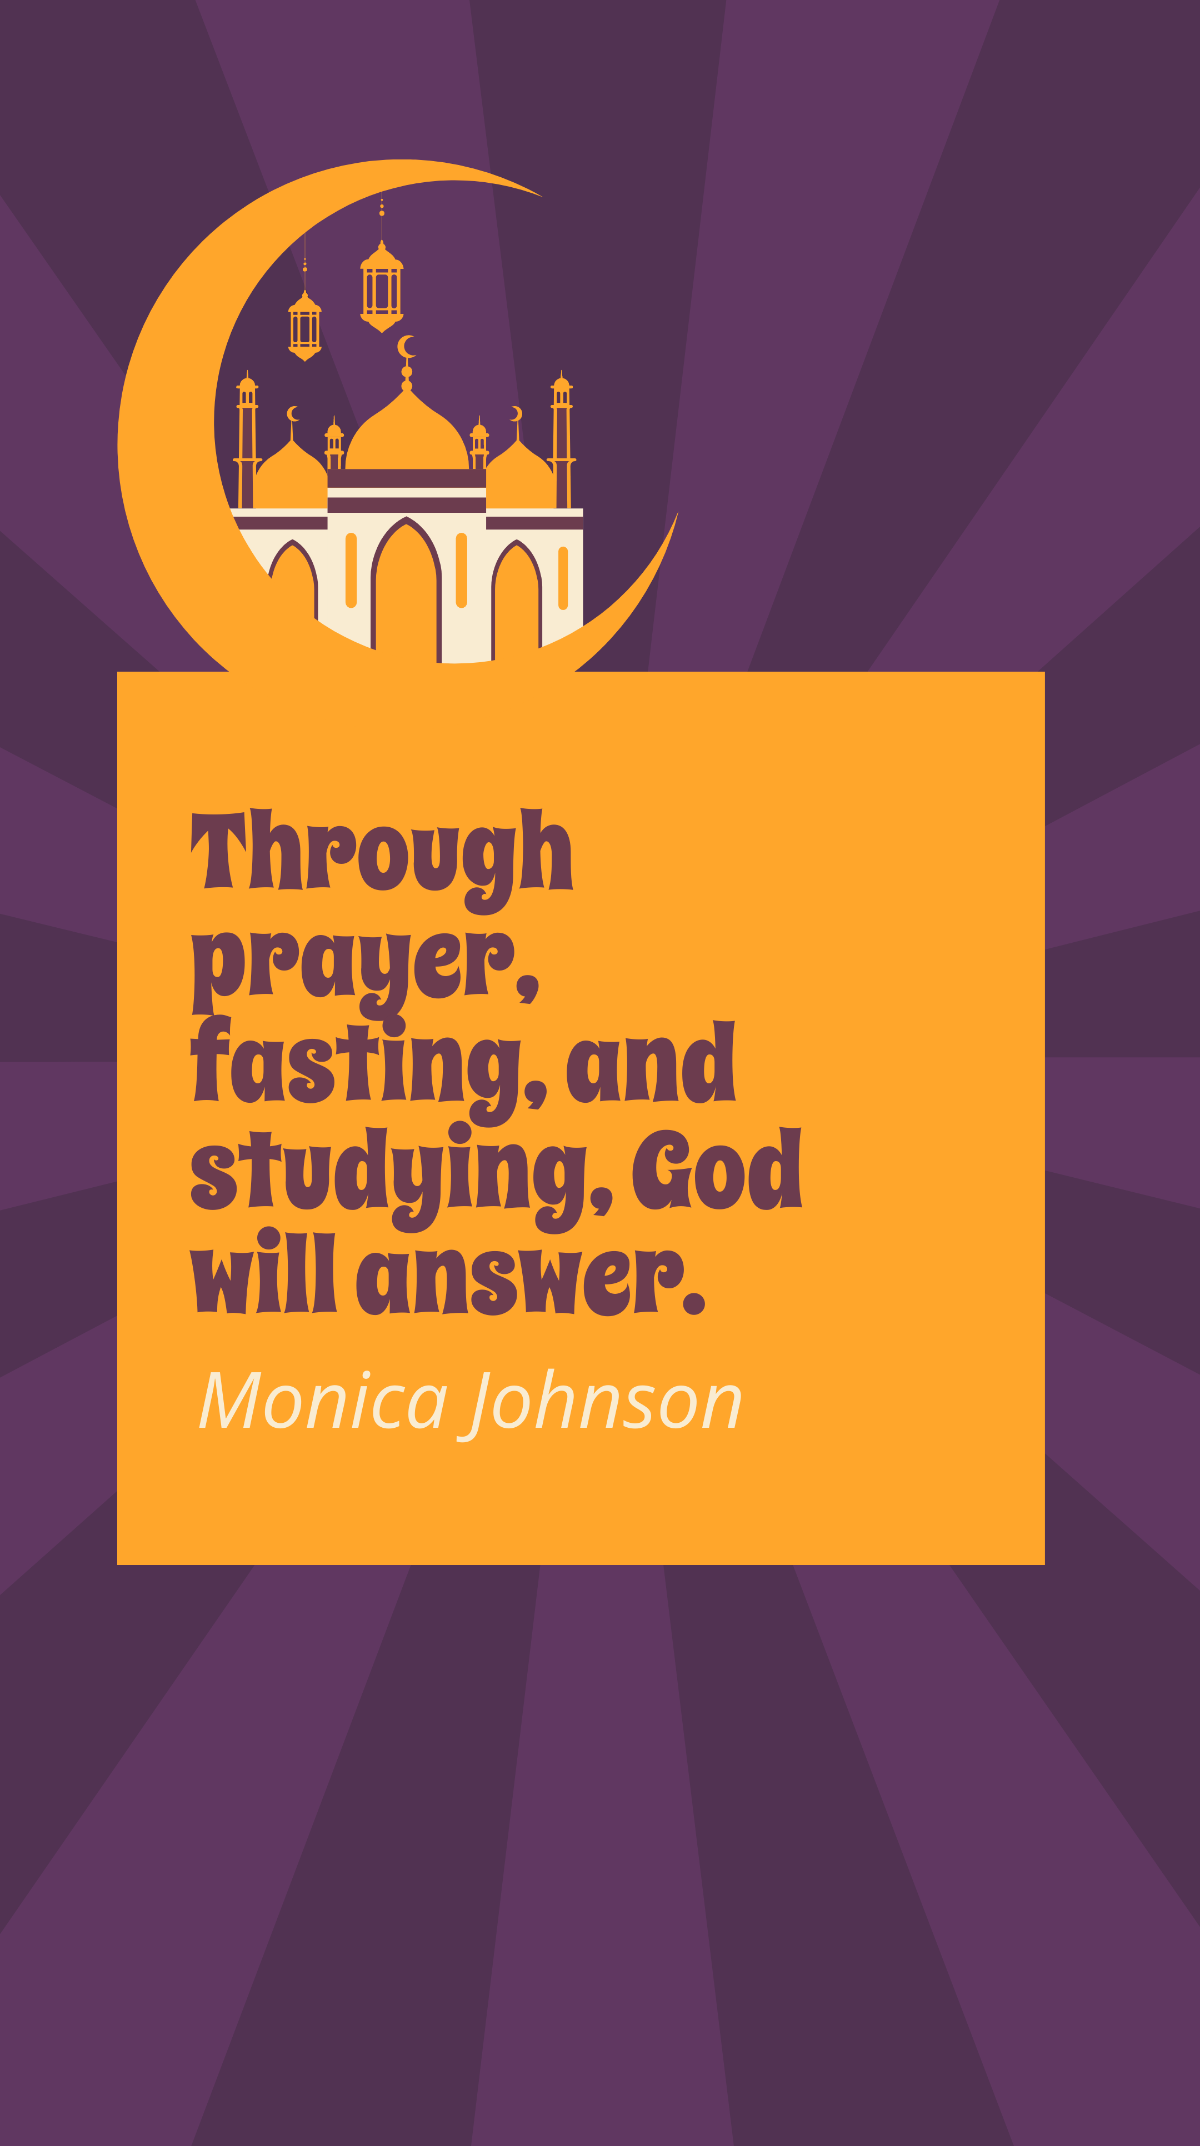 Monica Johnson - Through prayer, fasting, and studying, God will answer. Template